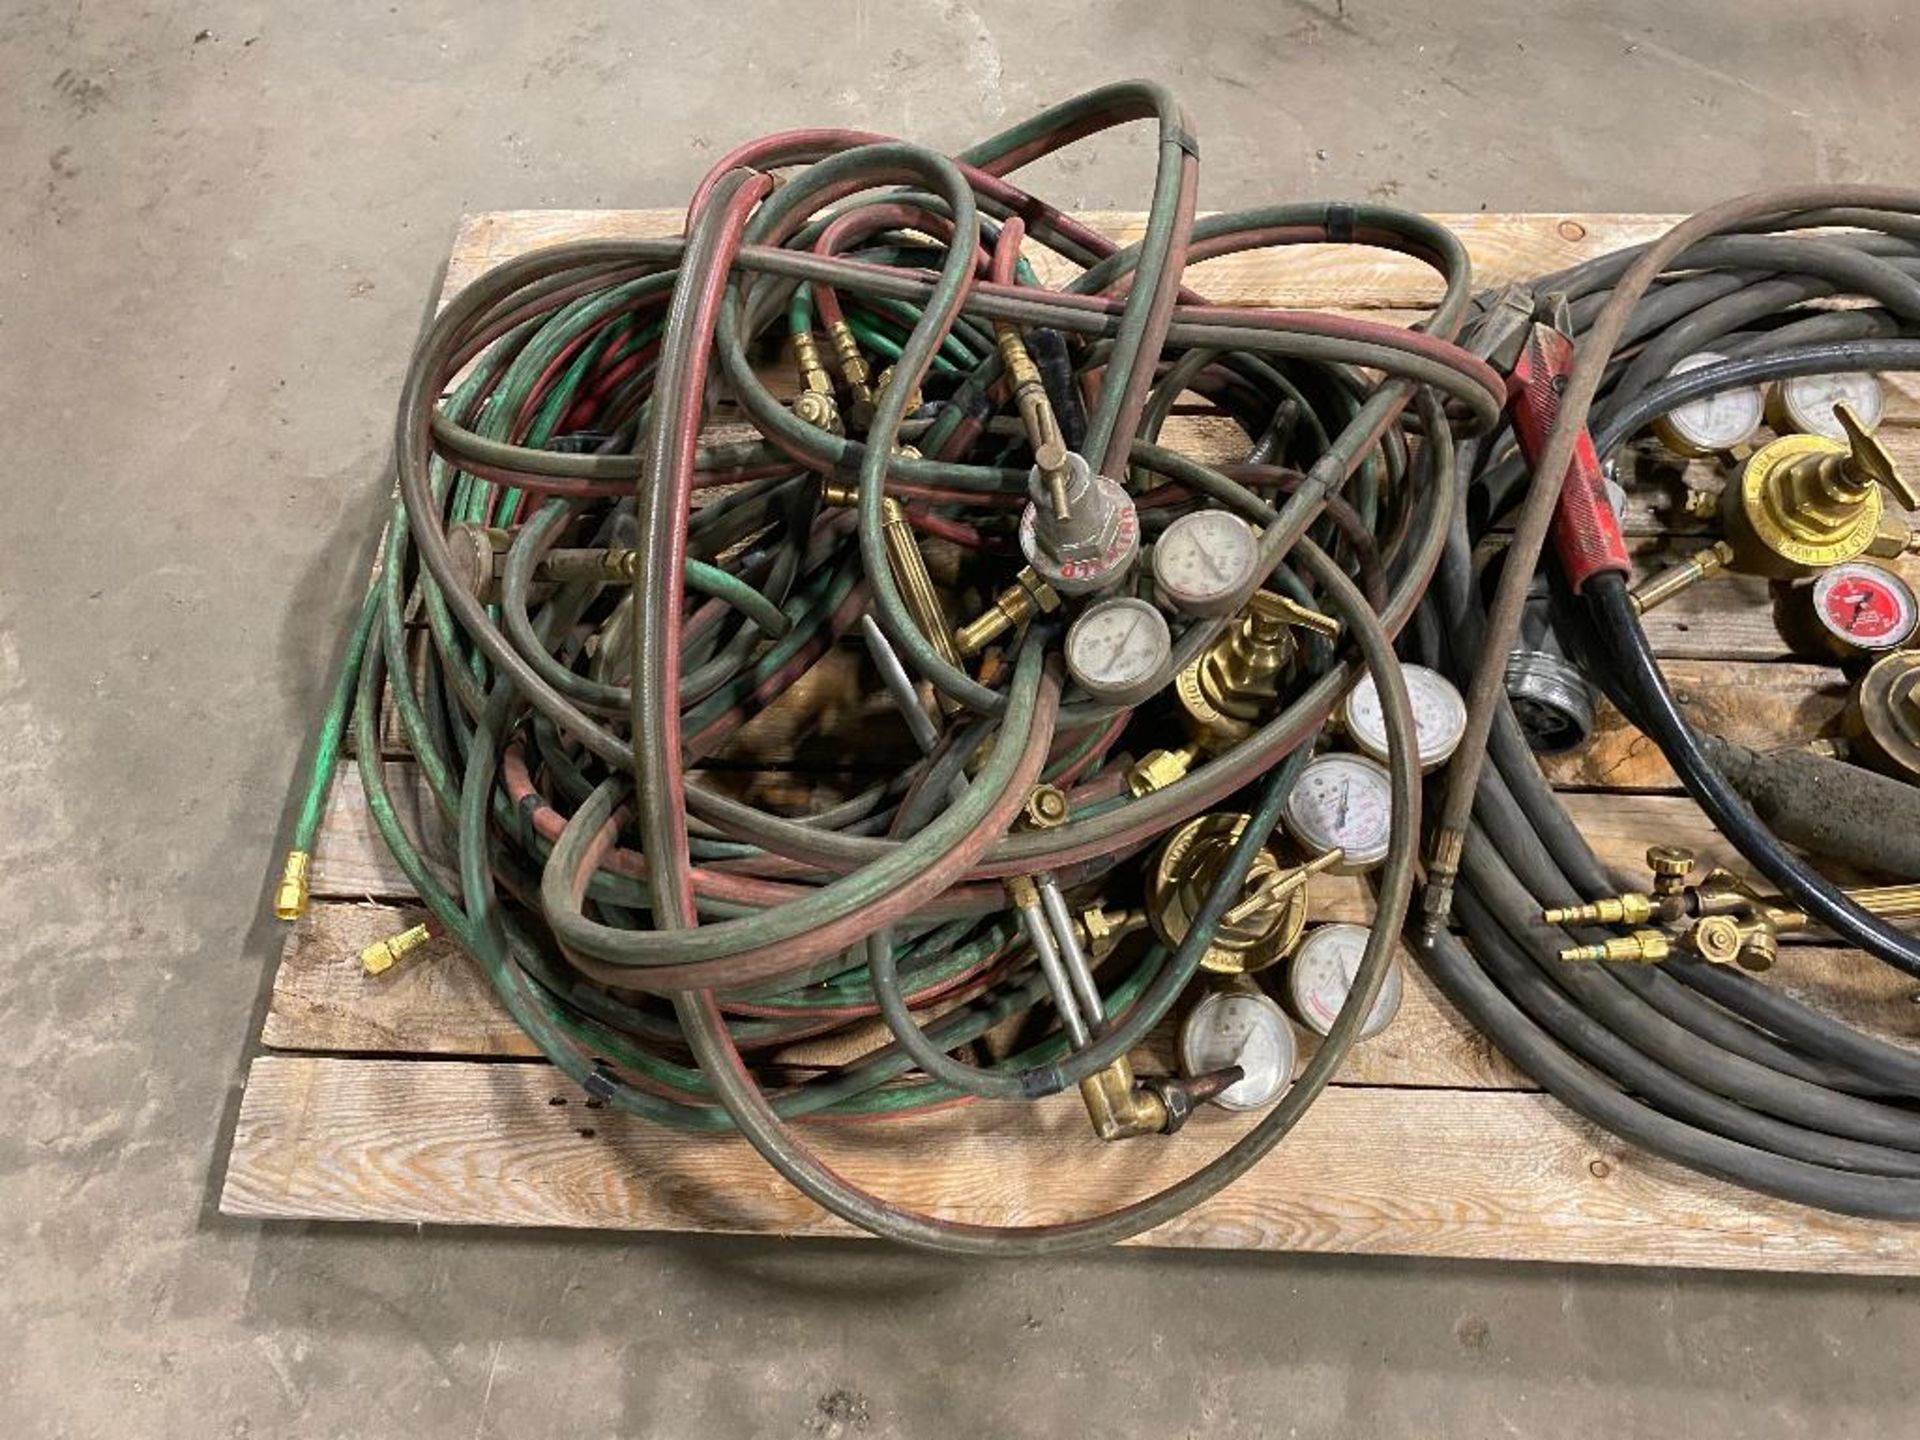 Lot of Asst. Oxy/Acetylene Hoses, Gauges, Torches, Air Line, etc. - Image 3 of 3